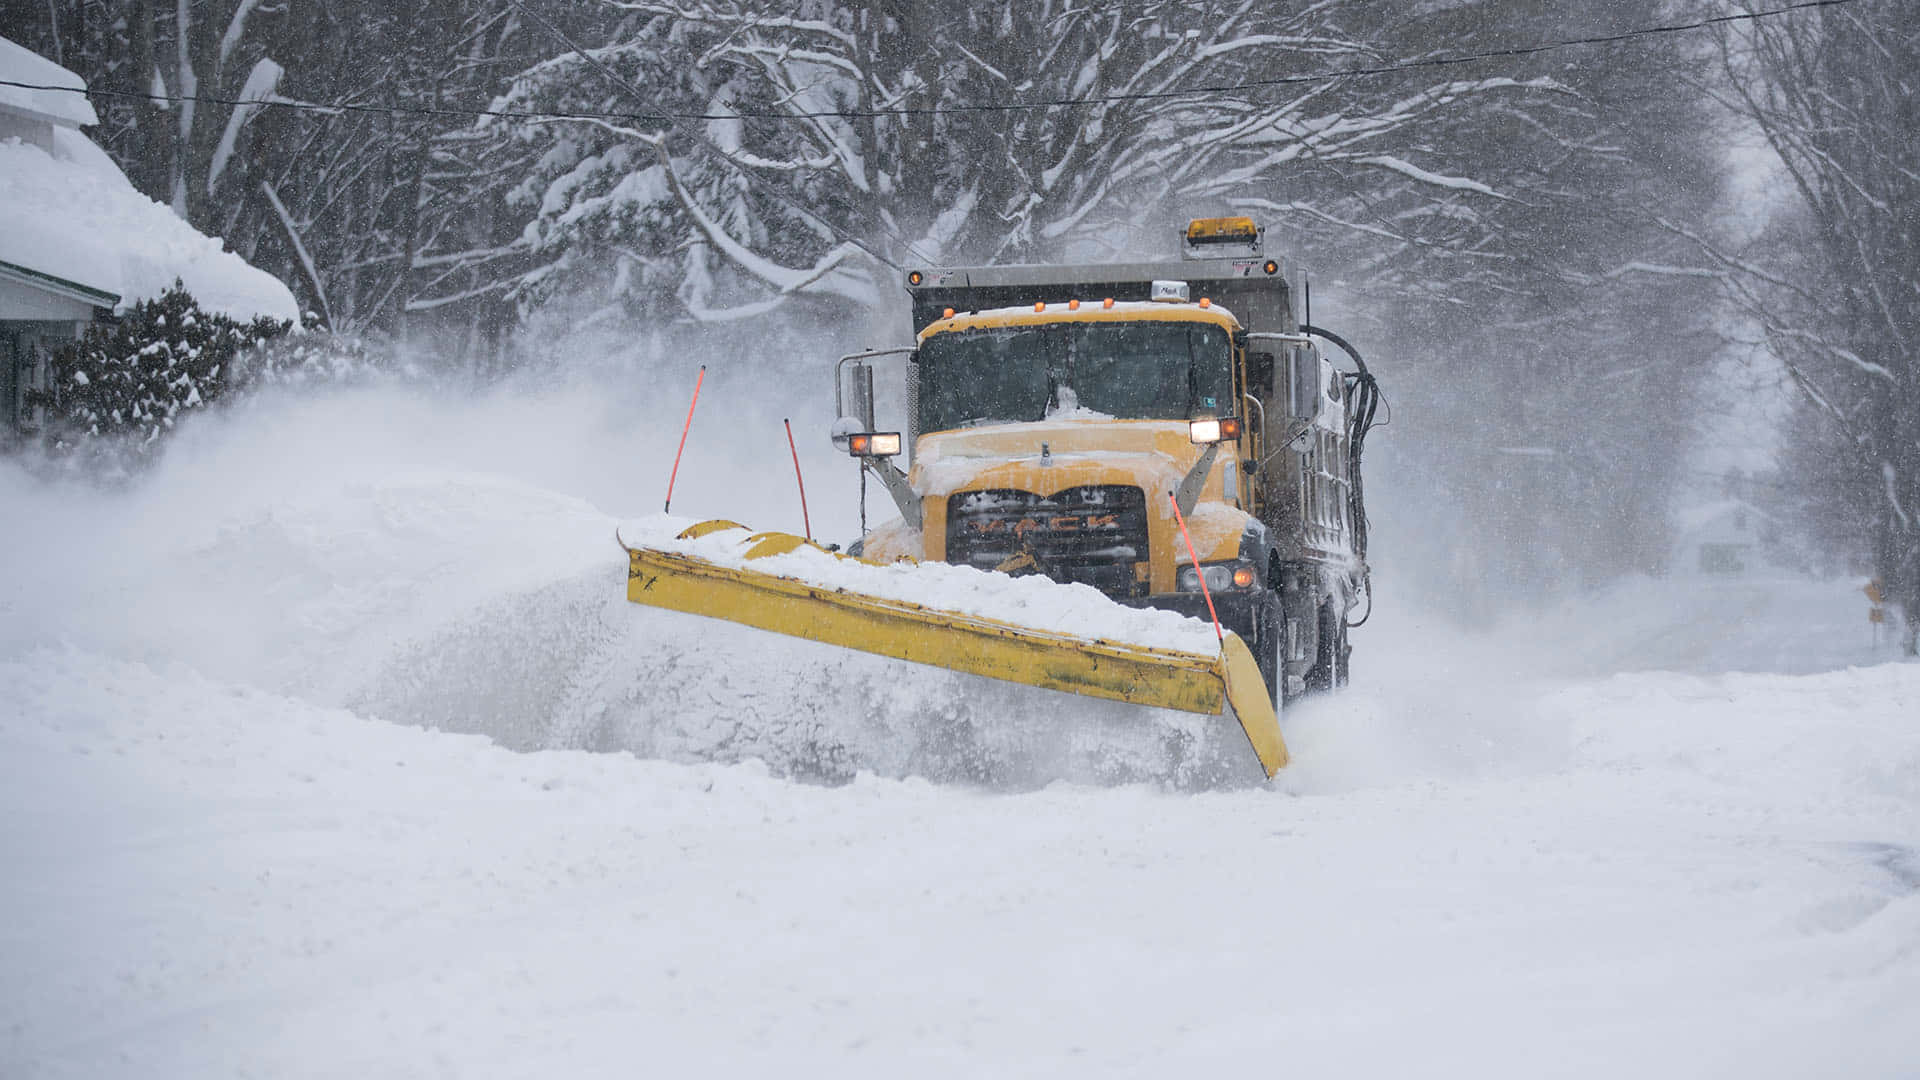 Snowplow clearing the road on a snowy day Wallpaper